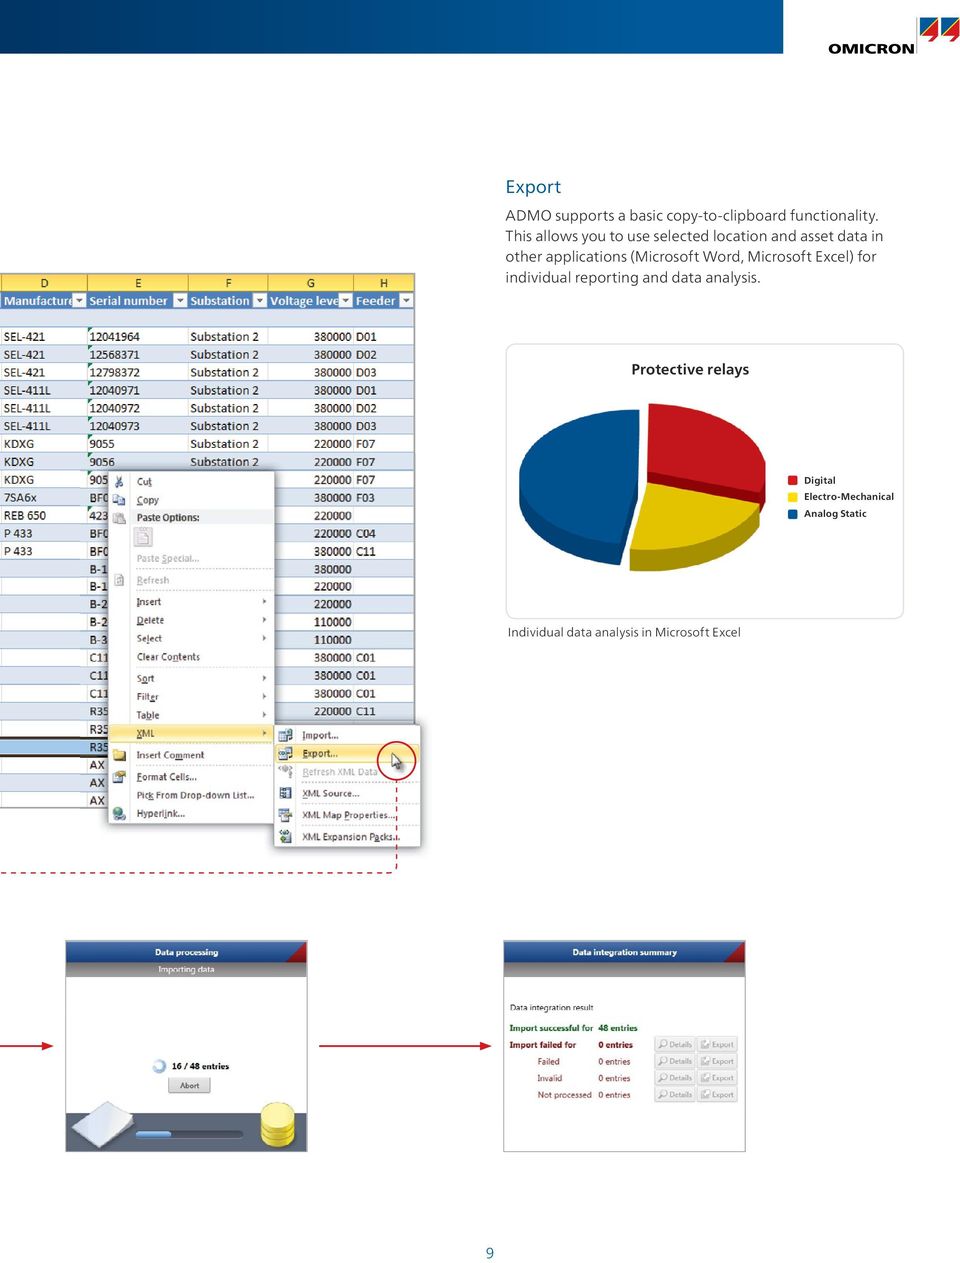 (Microsoft Word, Microsoft Excel) for individual reporting and data analysis.